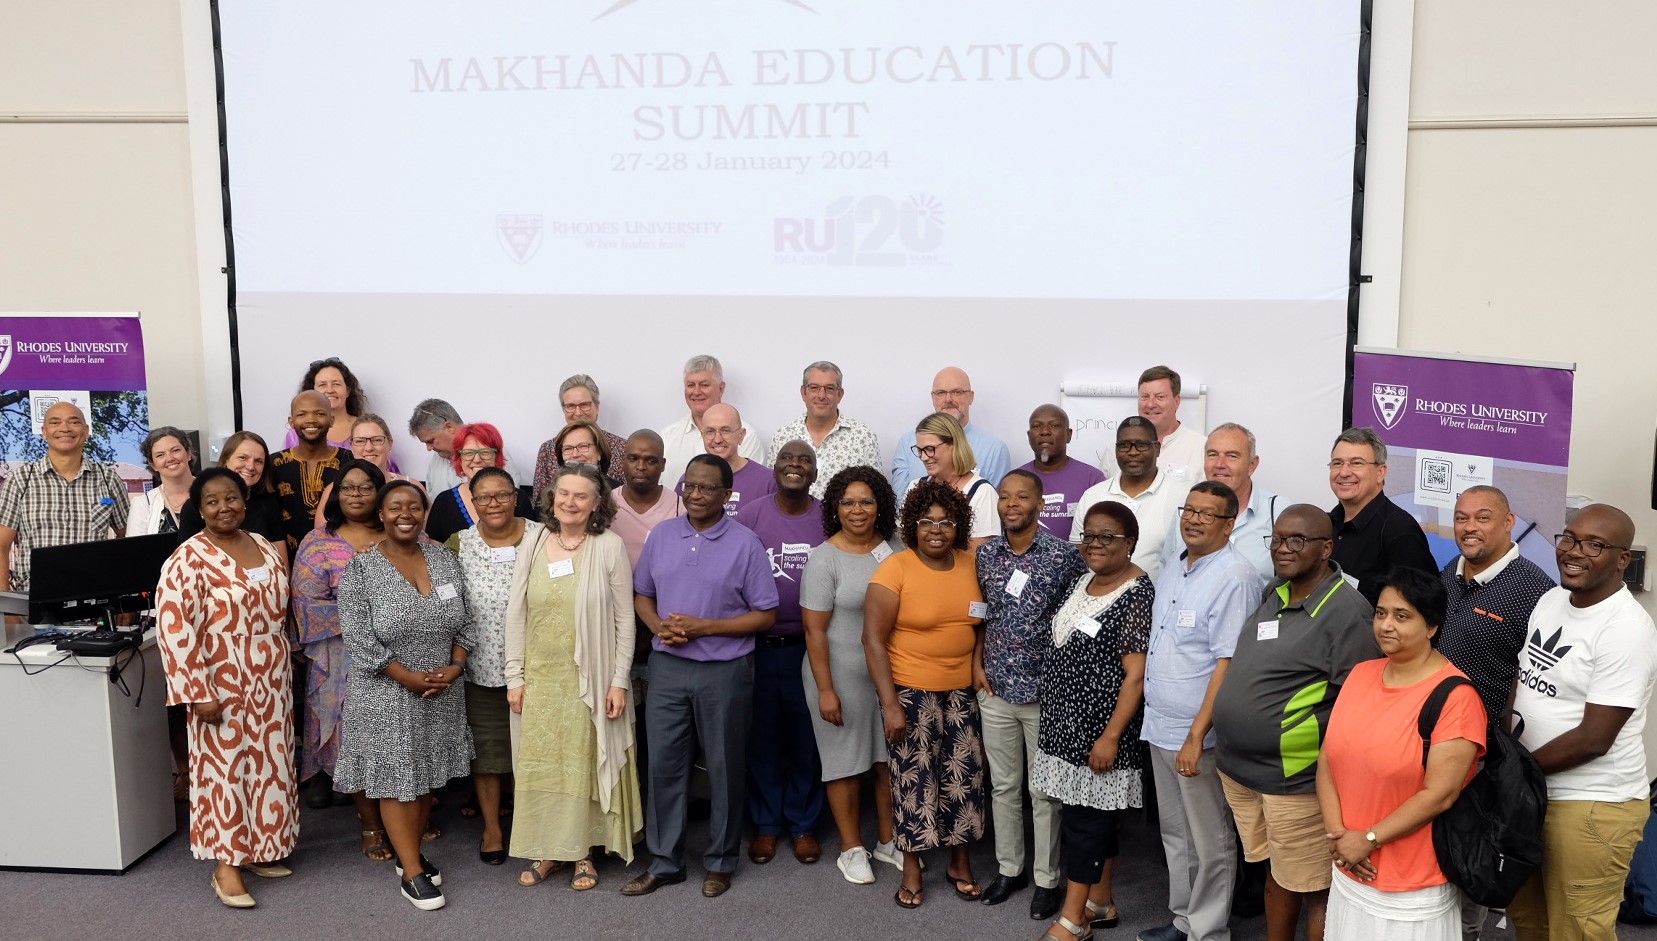 The organising committee of the Makhanda Education Summit, representing local early childhood development centres, primary and high schools, Rhodes University and NGOs, take a bow.